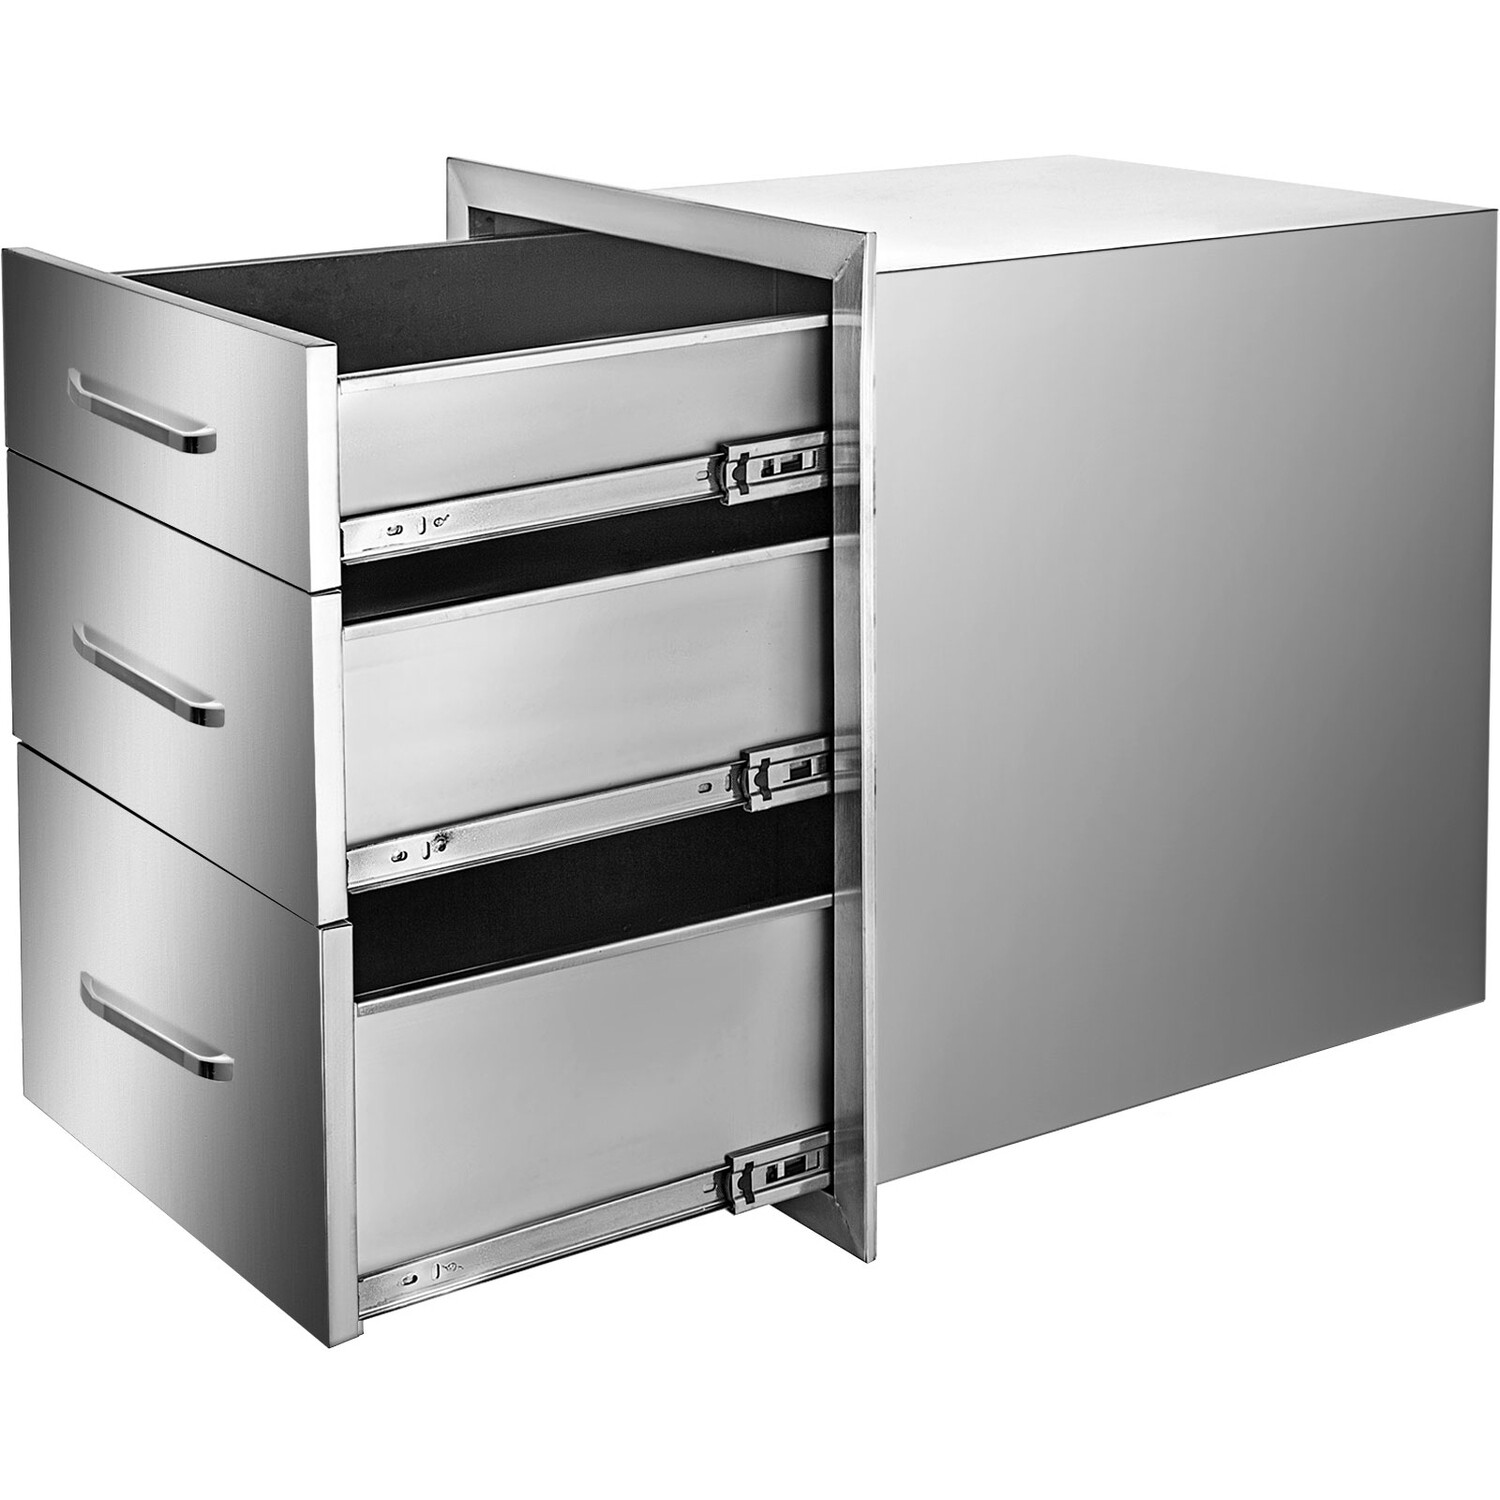 Stainless Steel 3 Chest Of Outdoor Kitchen Drawers 14 x 20.3 x 23.2 inch